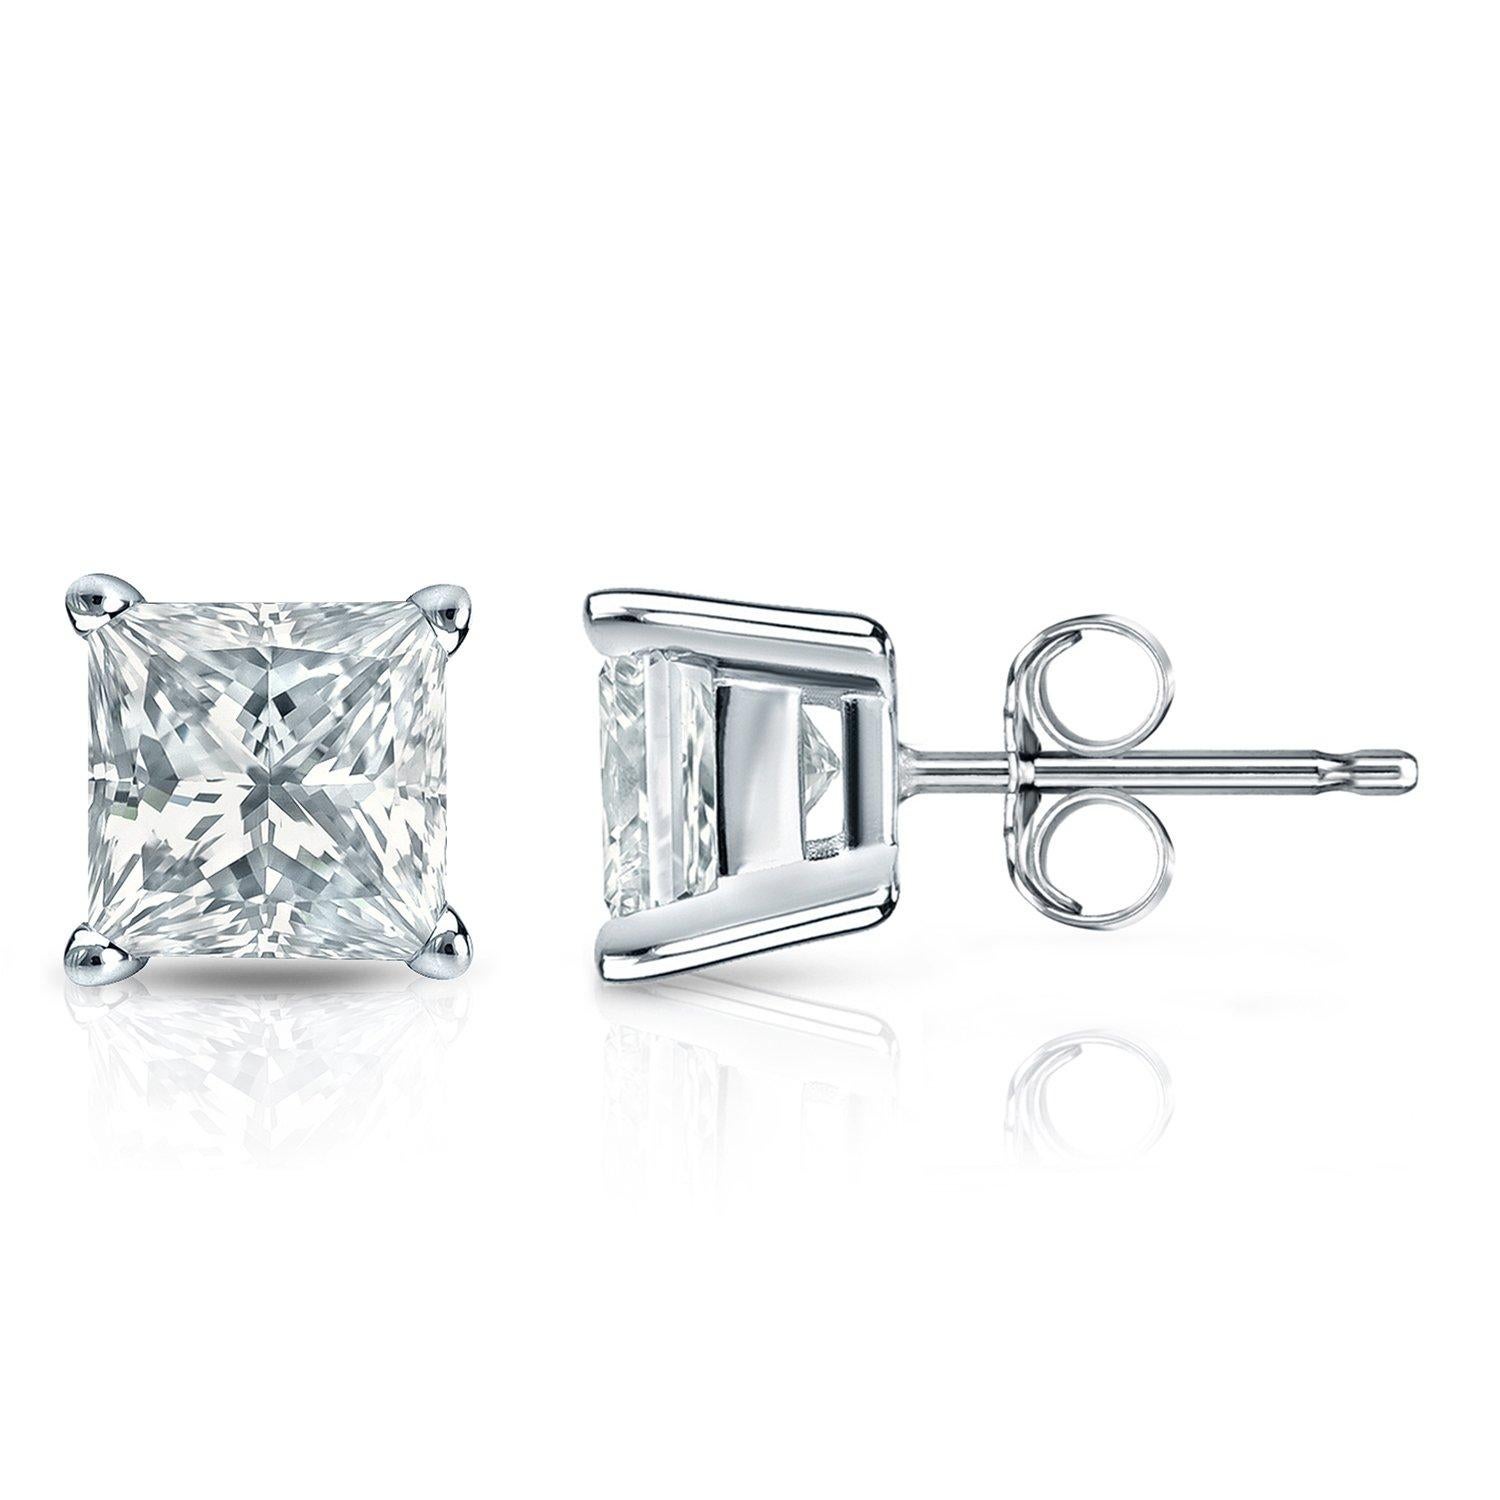 Each Stone is 1.00 carat which makes the total of 2 carat. The quality of the diamonds are F color ( colorless) with SI clarity ( eye clean ). The classic princess cut diamond stud earrings comes in three different settings. The first and second